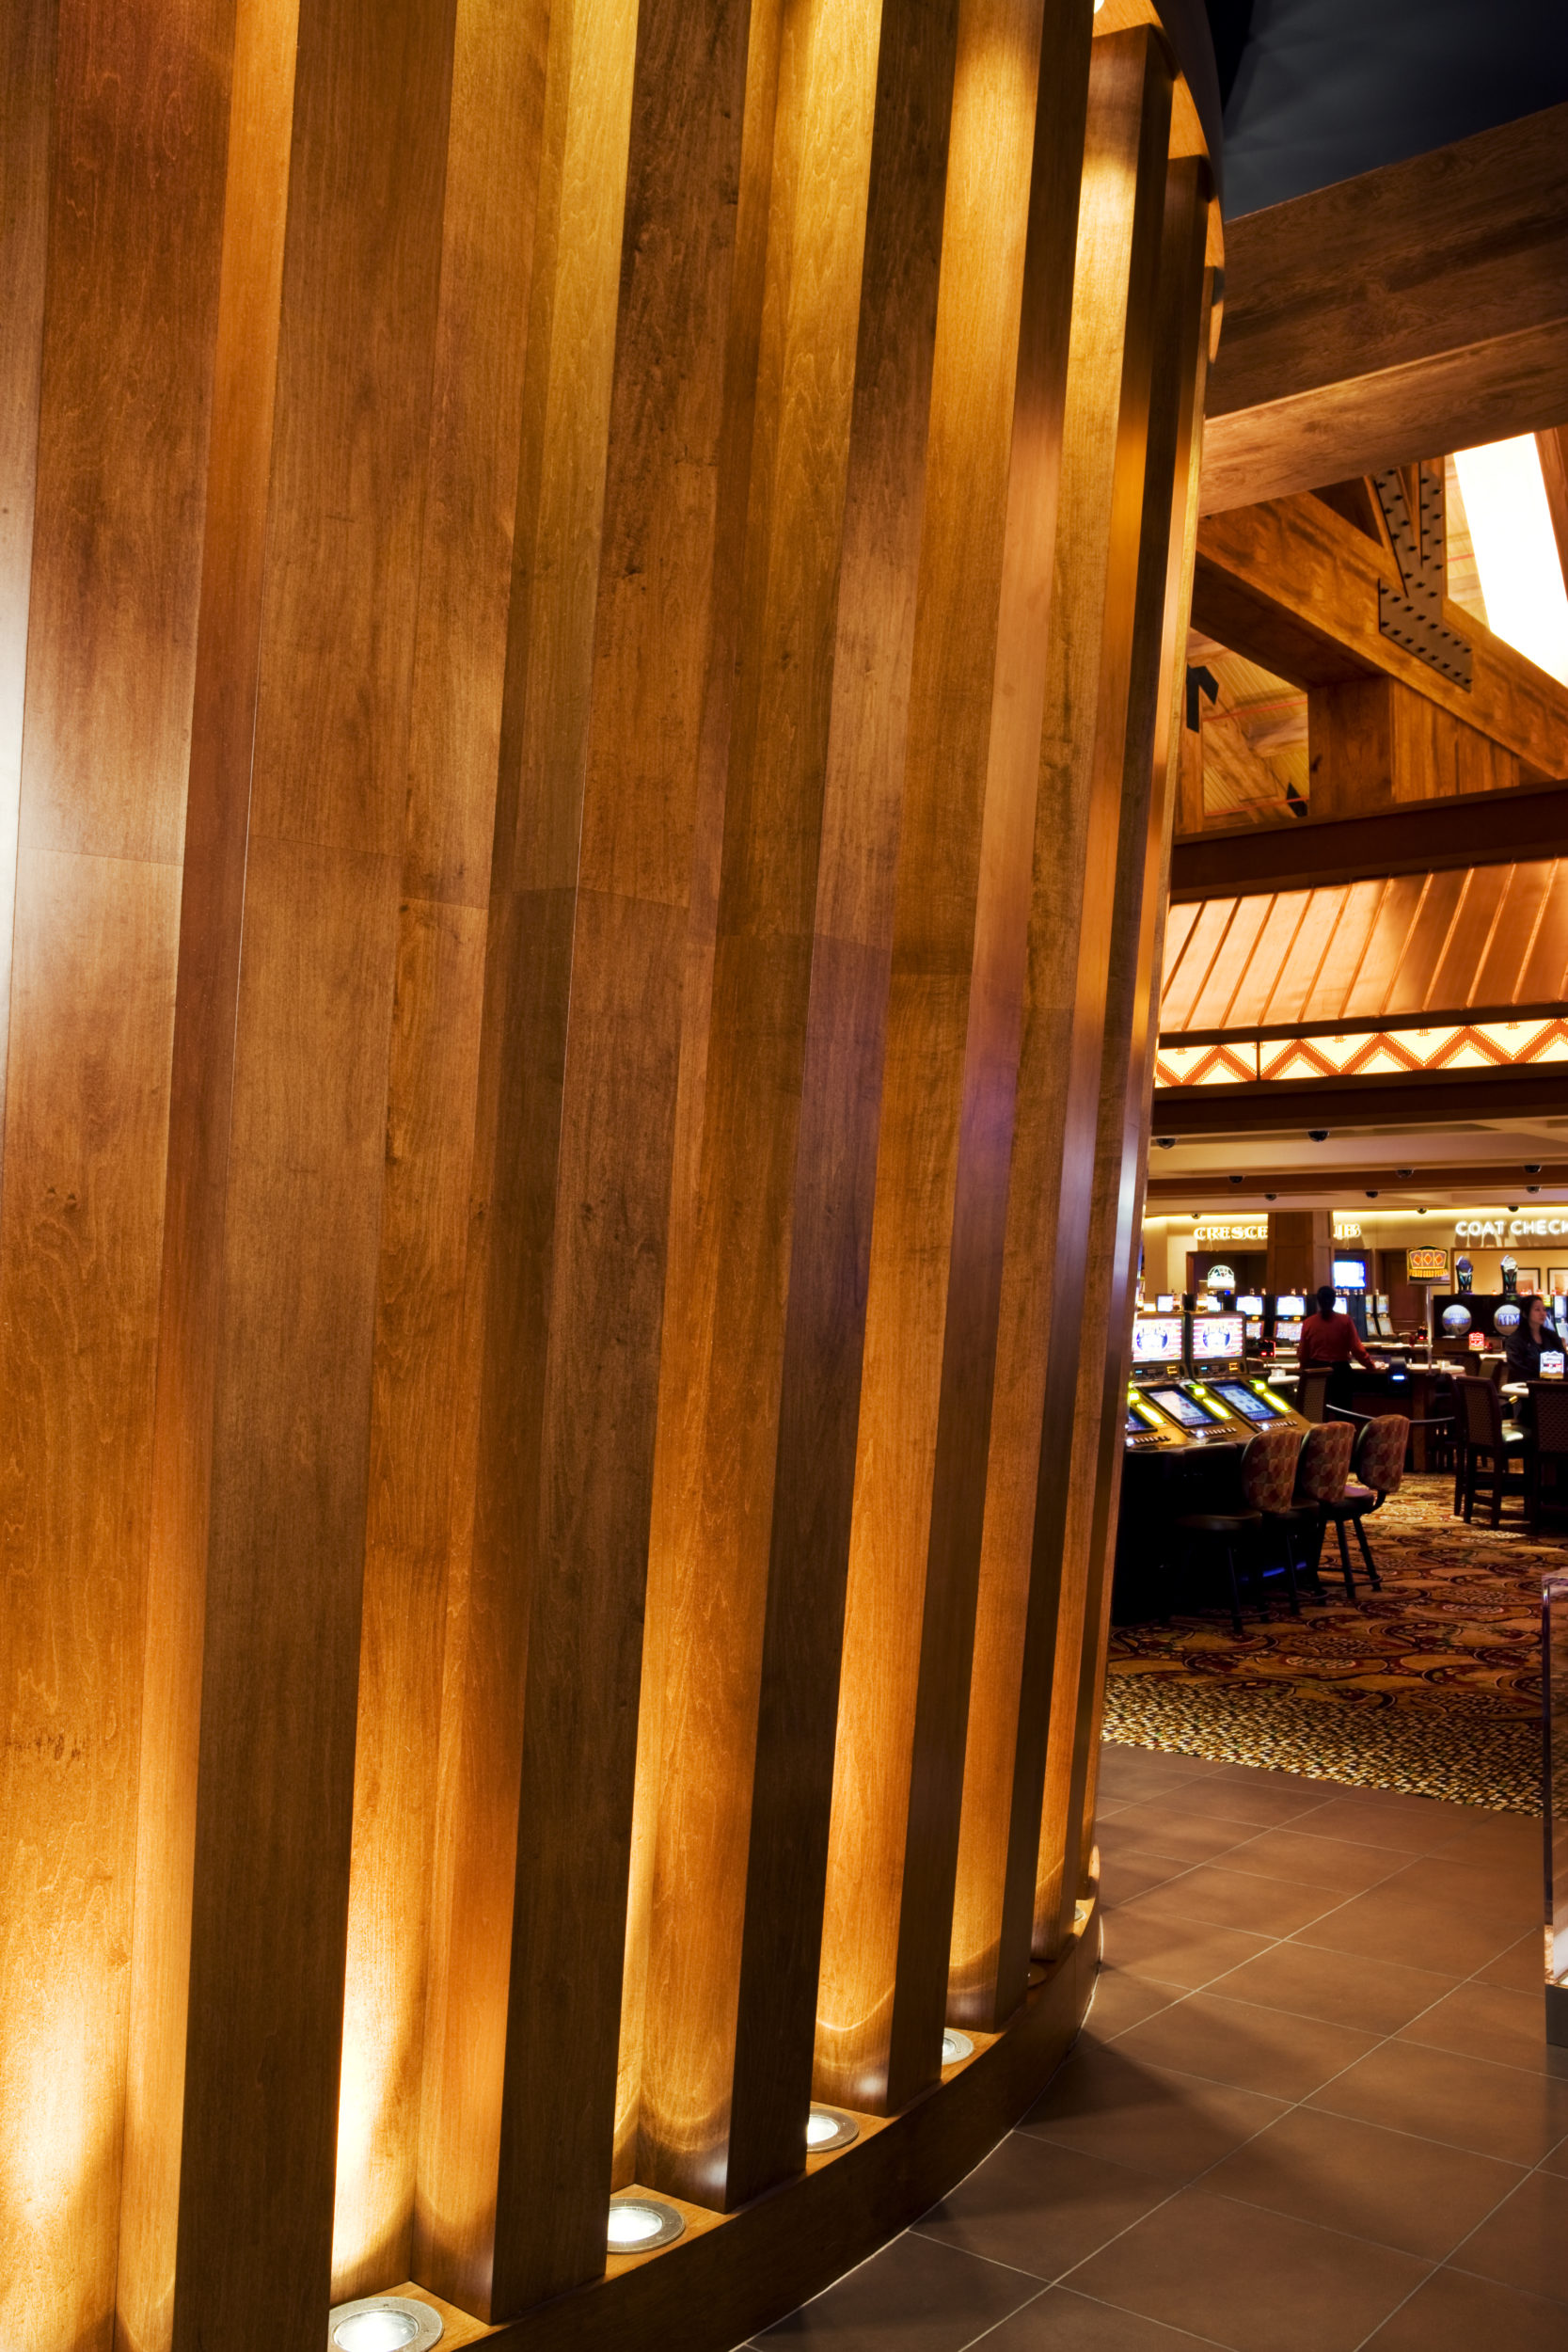 snoqualmie casino buffet phone number